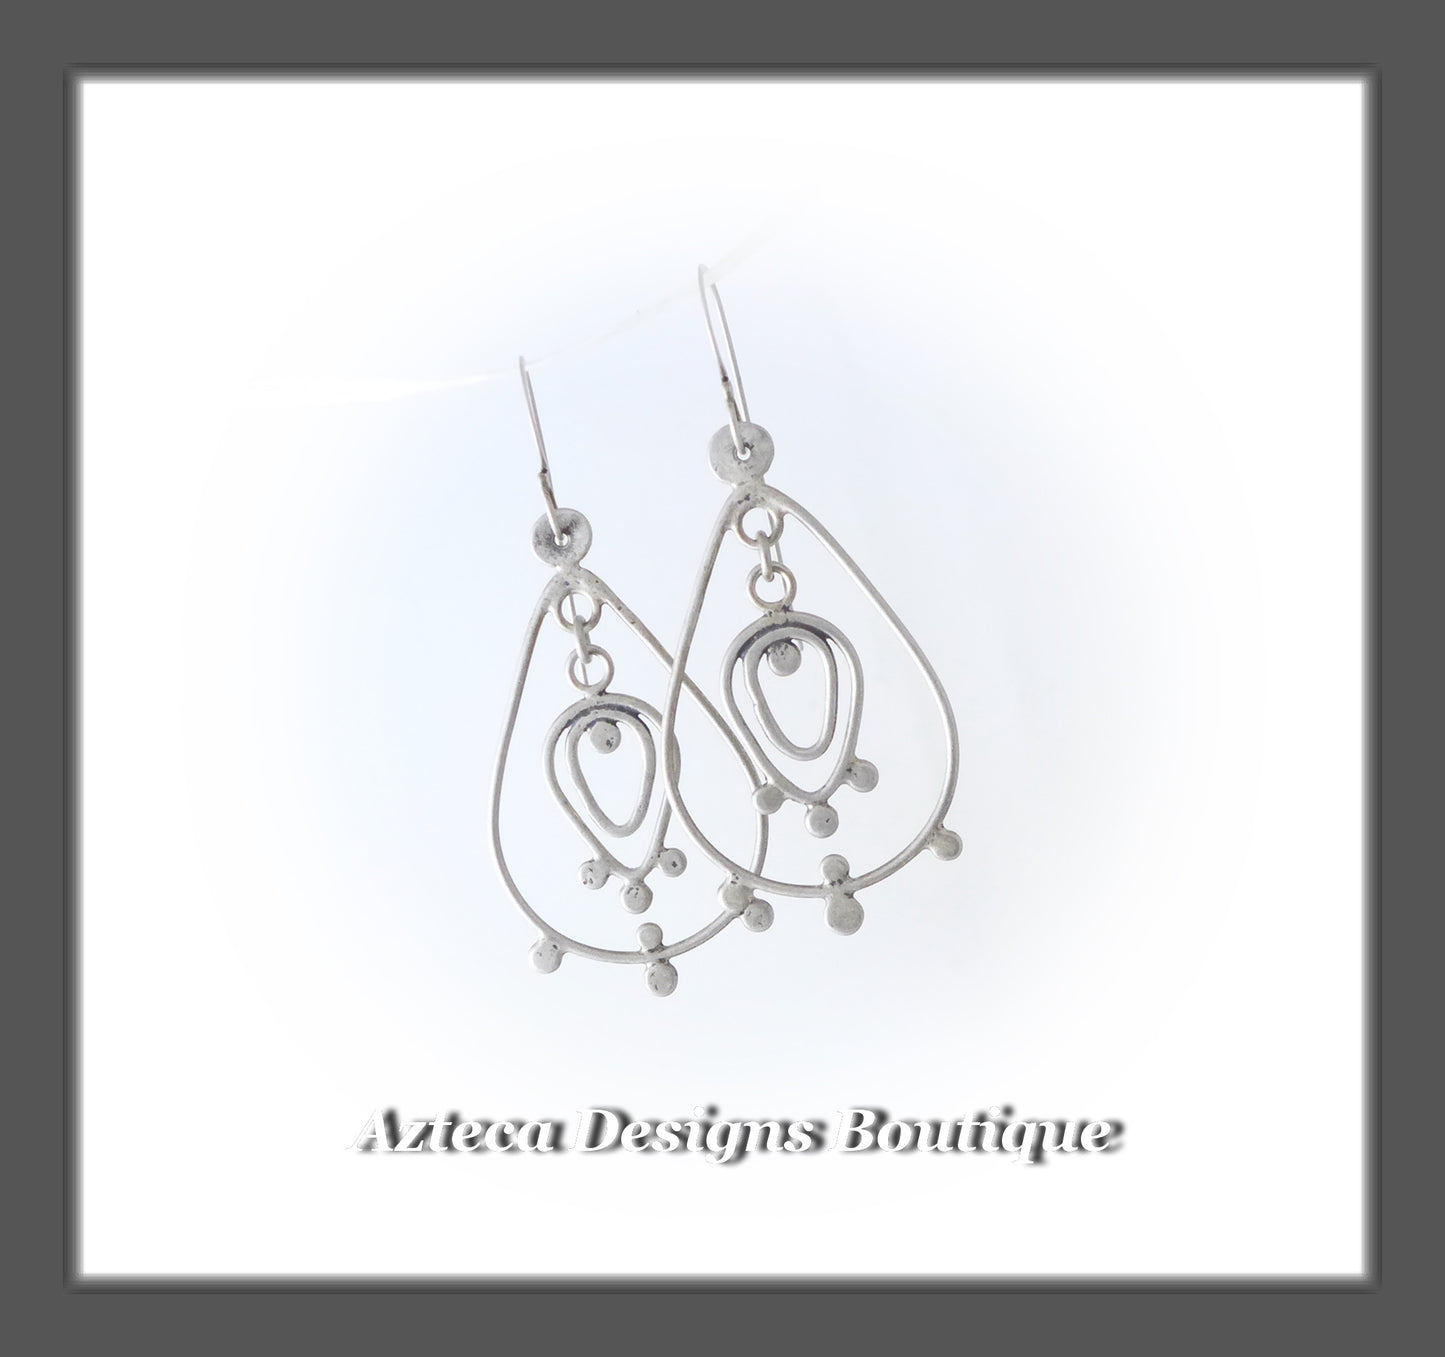 Hand Fabricated Argentium Silver Earrings + Lace and Spice Collection